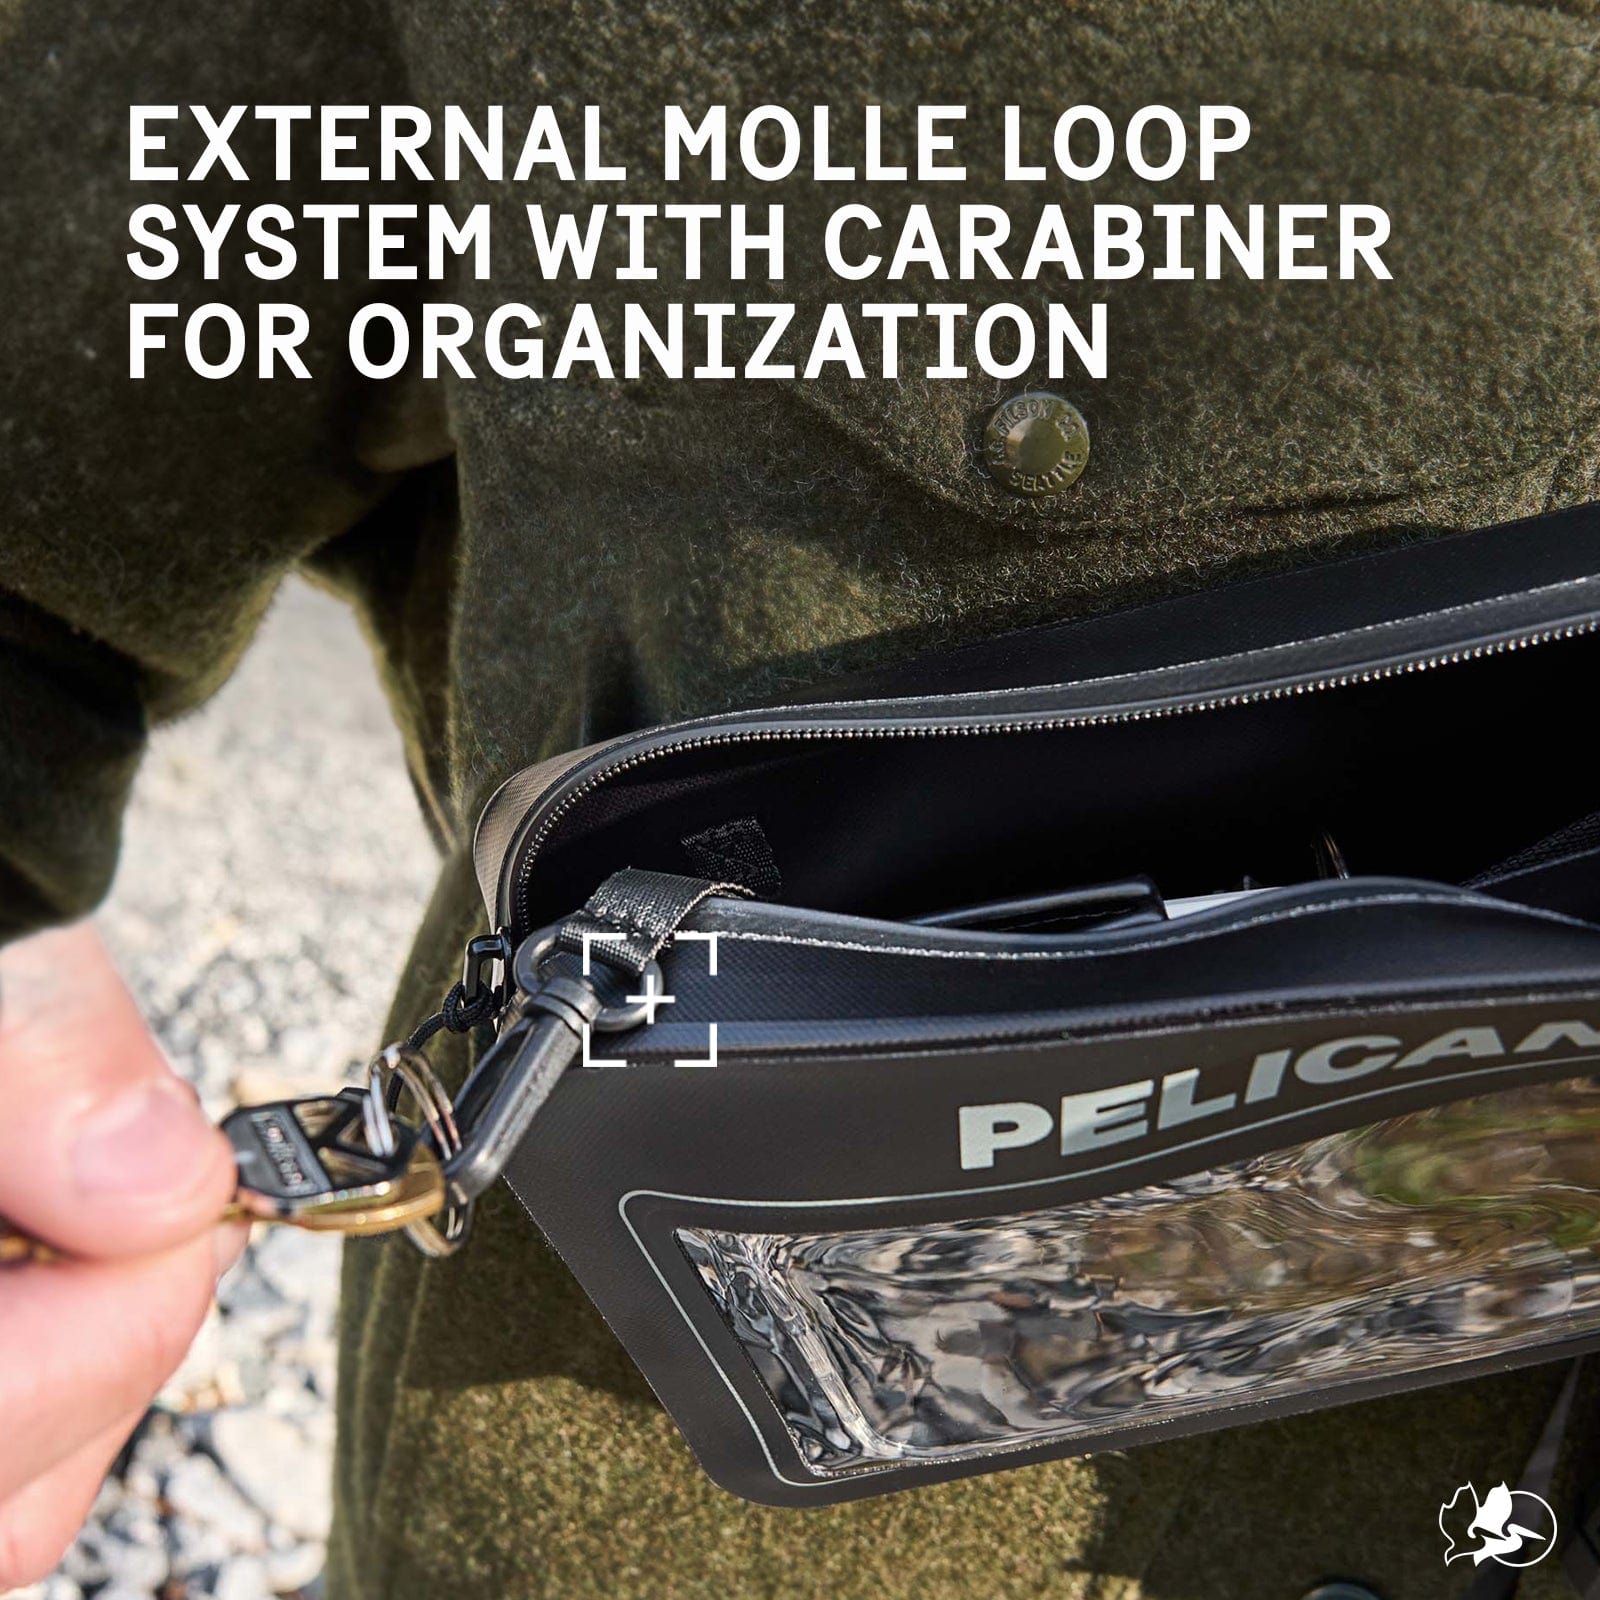 EXTERNAL MOLLE LOOP SYSTEM WITH CARABINER ORGANIZATION